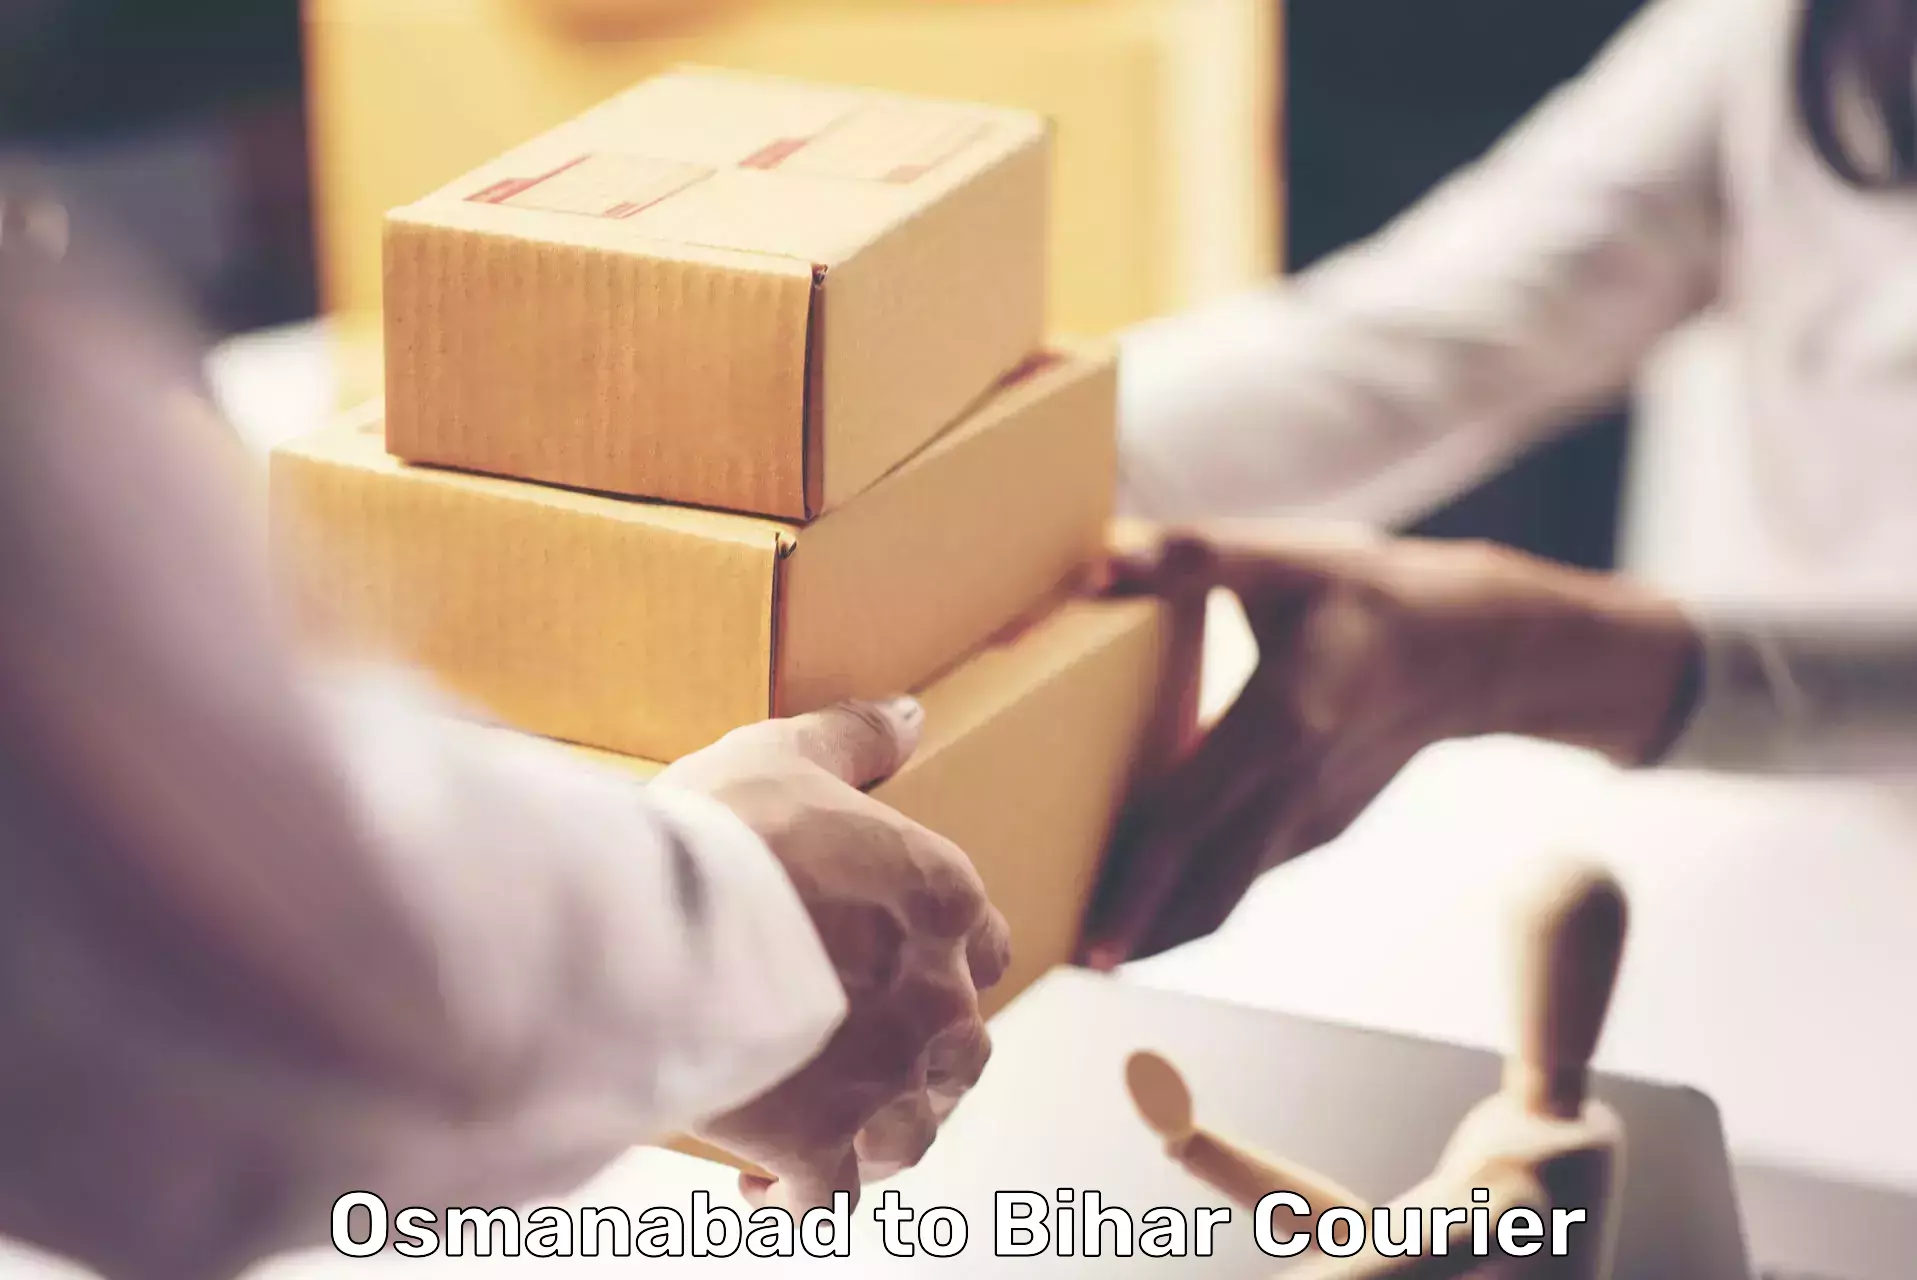 Efficient order fulfillment Osmanabad to Forbesganj